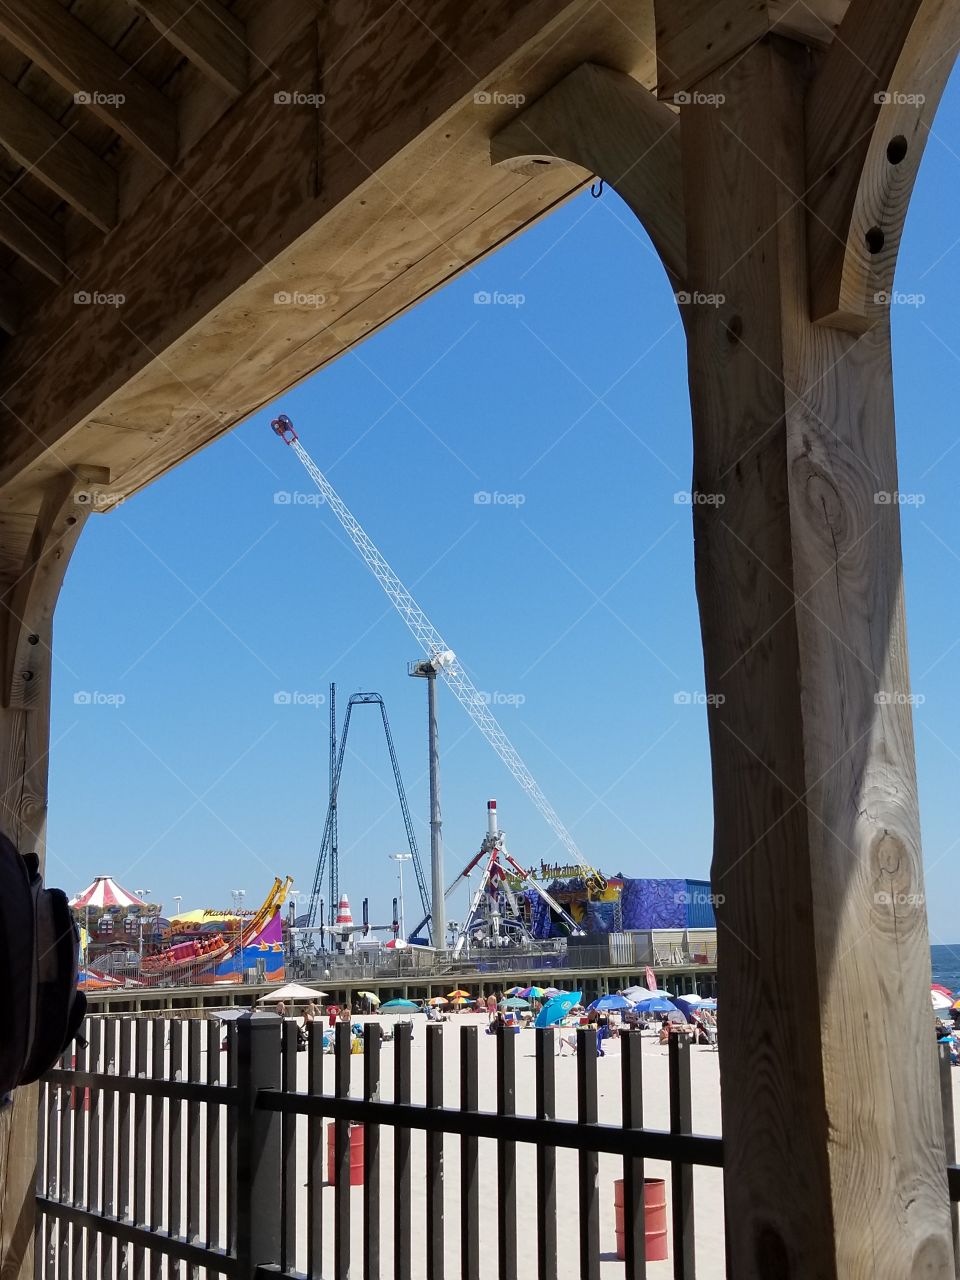 Rides at Seaside New Jersey